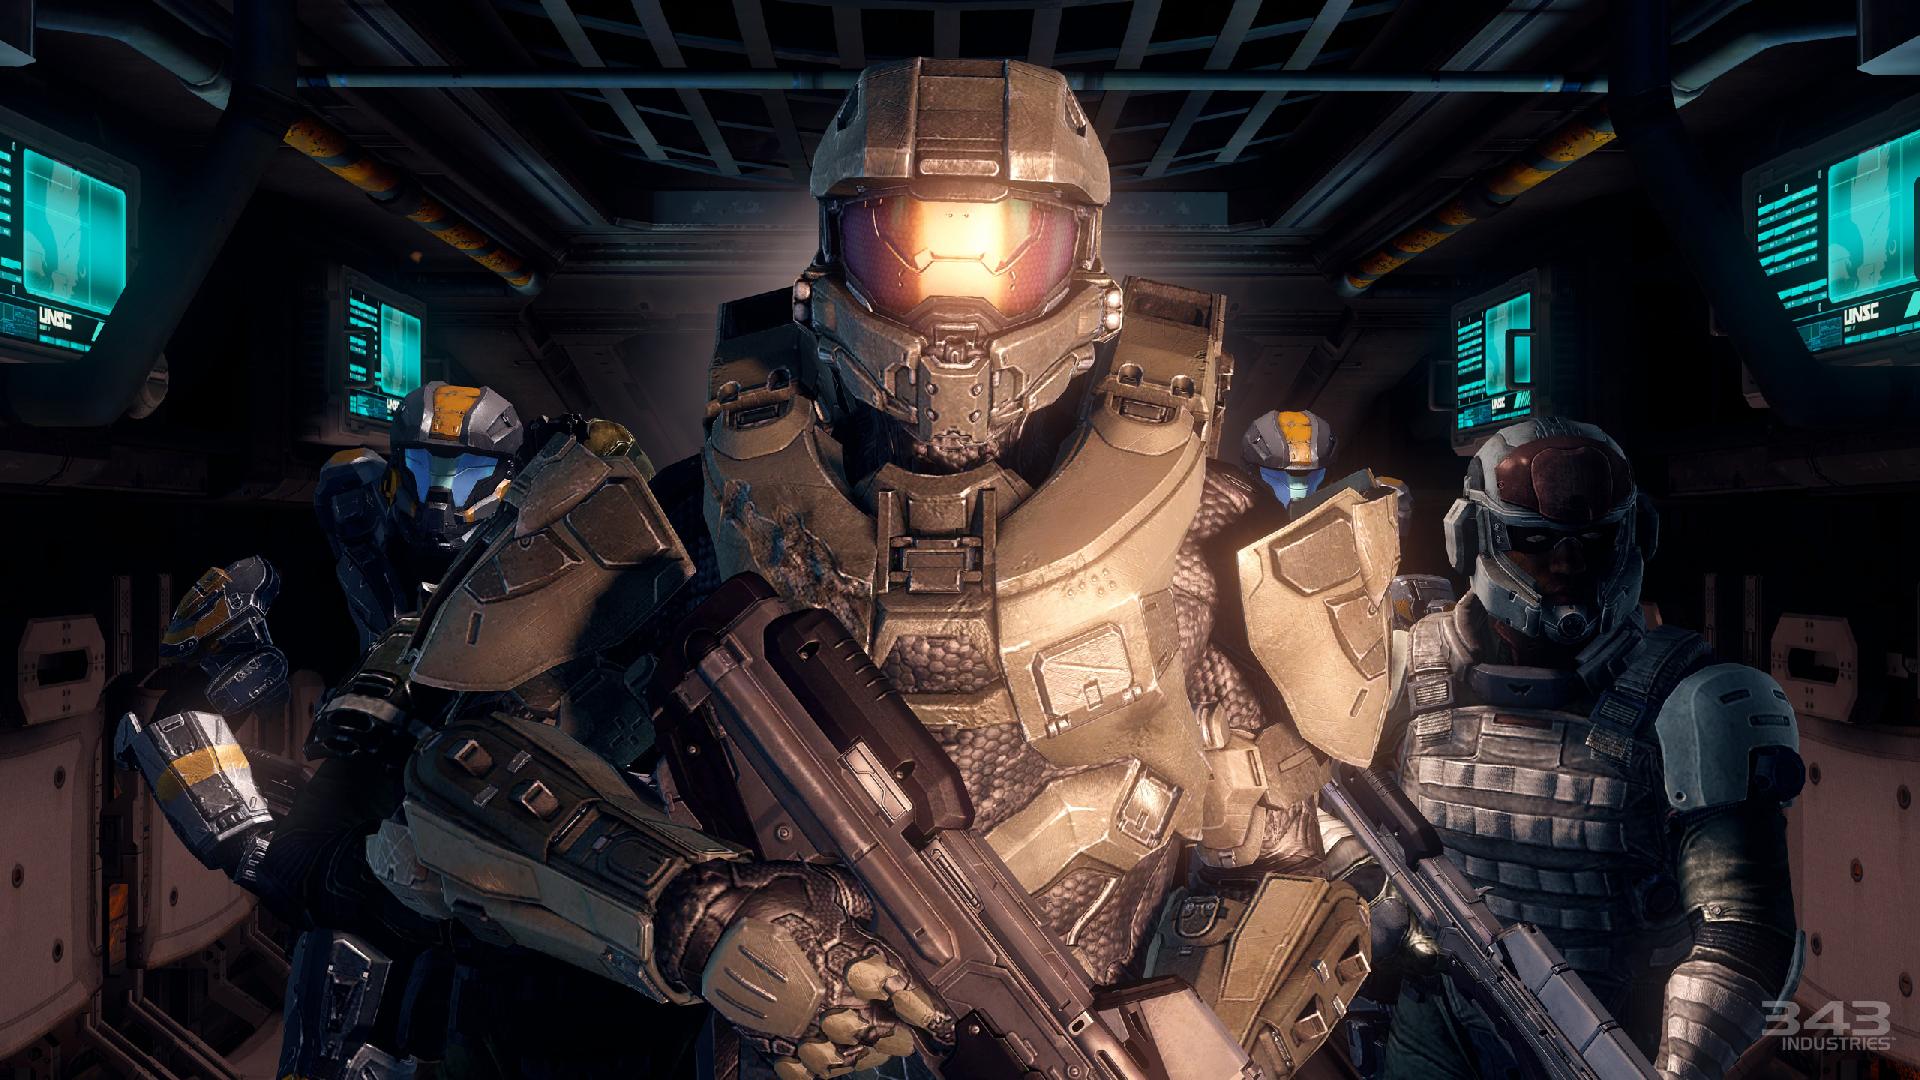 Steven Spielberg’s Live-Action Halo Series Likely to Begin Filming This Fall